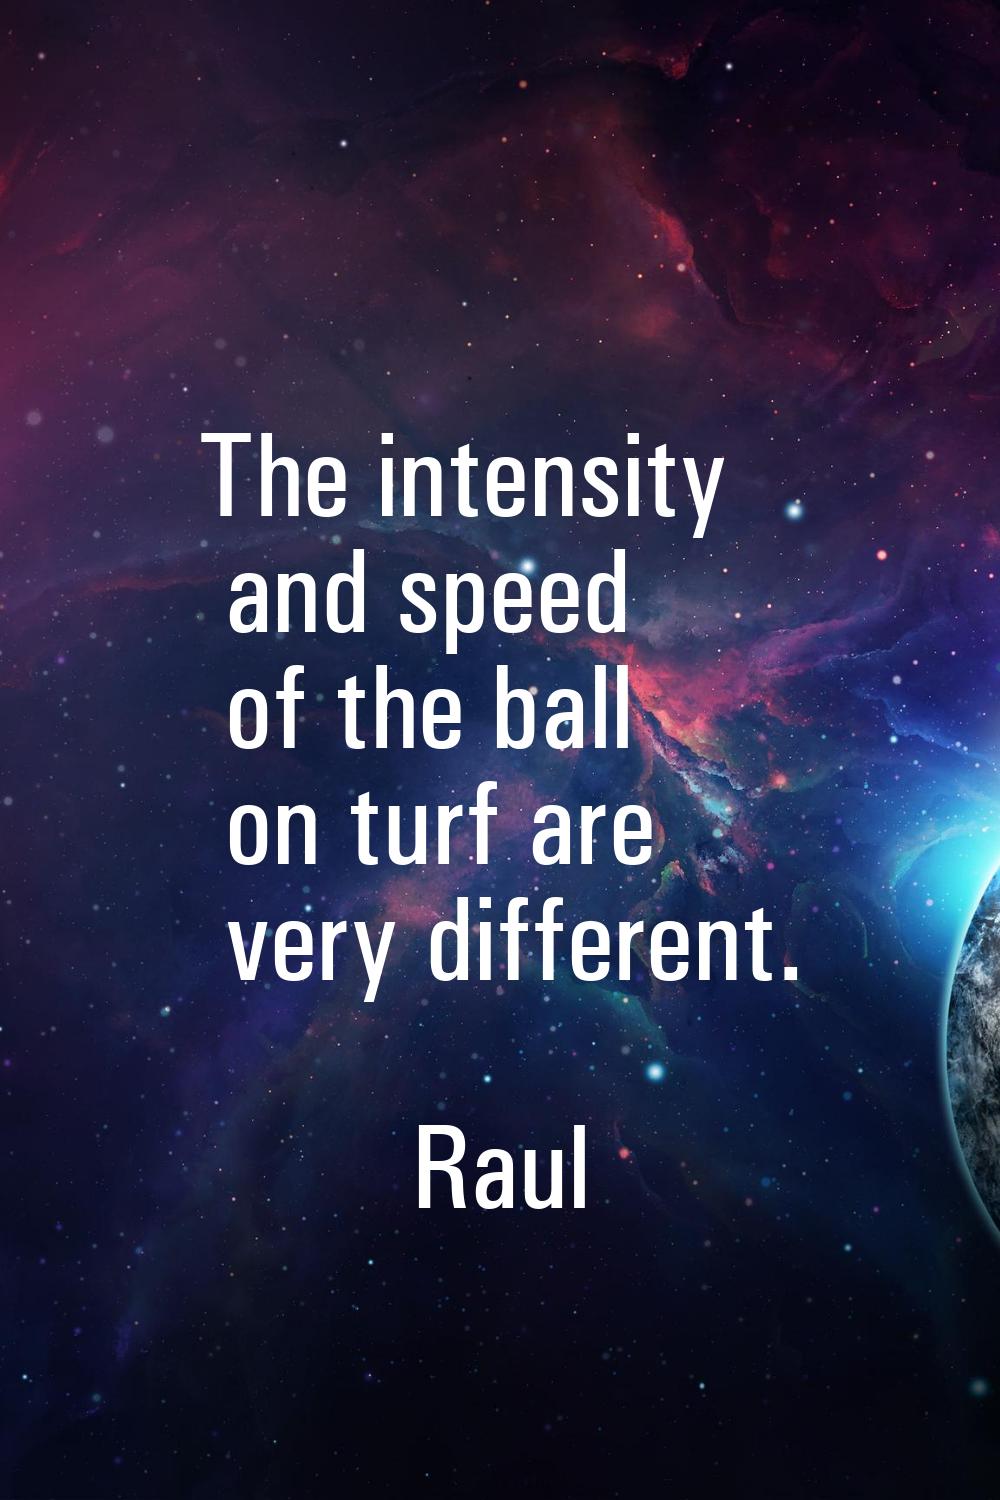 The intensity and speed of the ball on turf are very different.